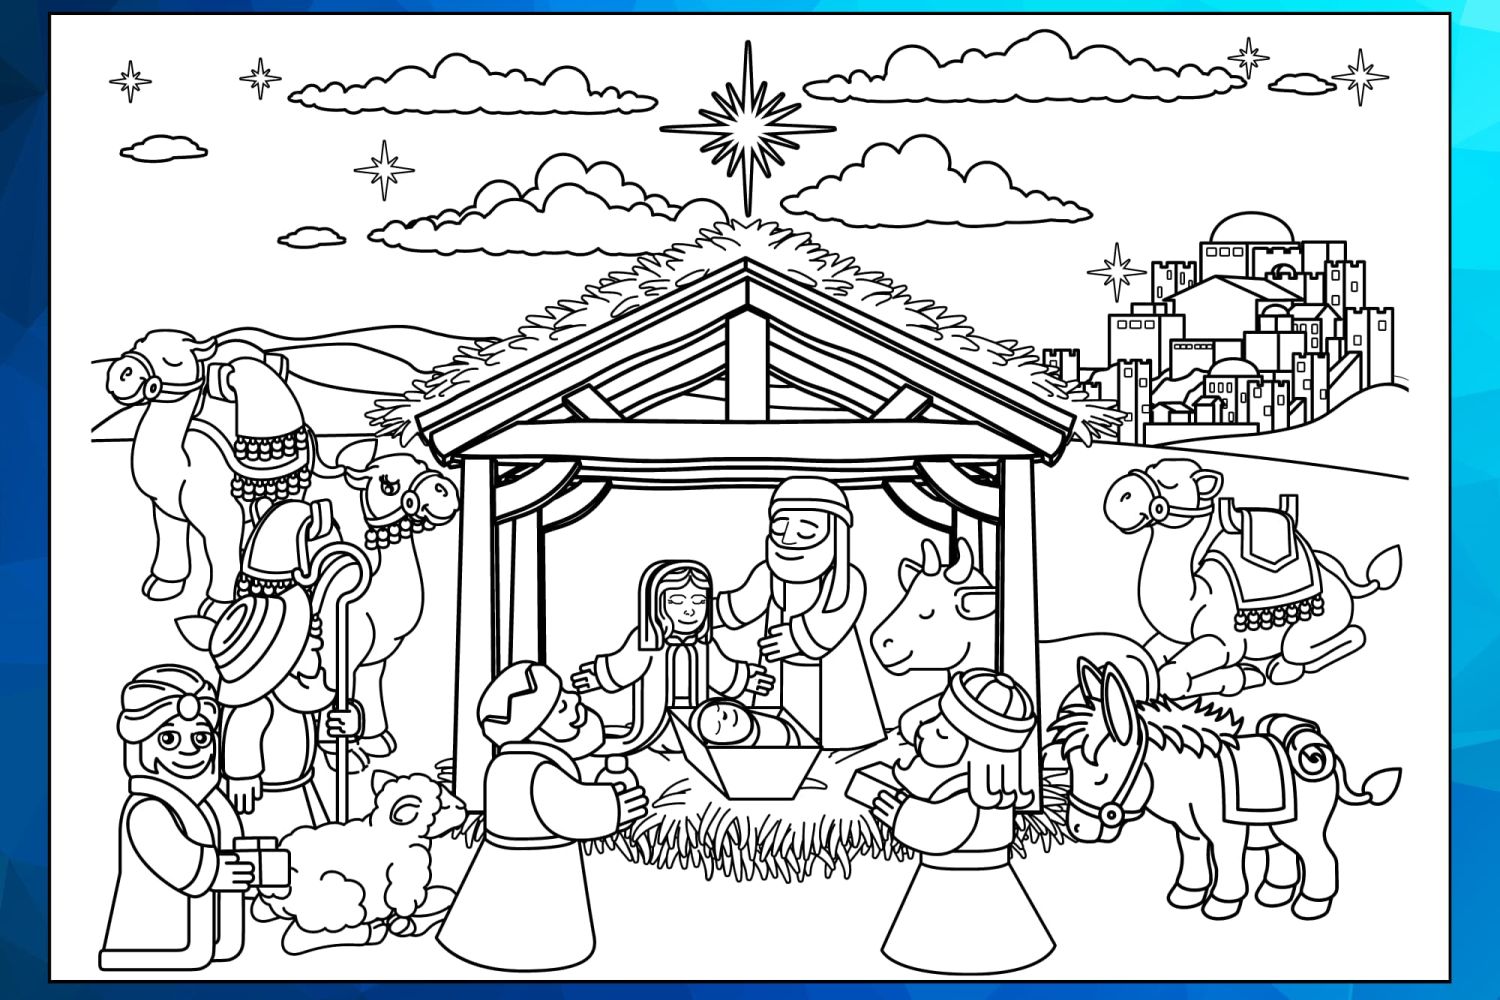 Nativity%20Scene%20Christmas%20Coloring%20Pages%20Worksheet%201-175b3fa4 Crafts